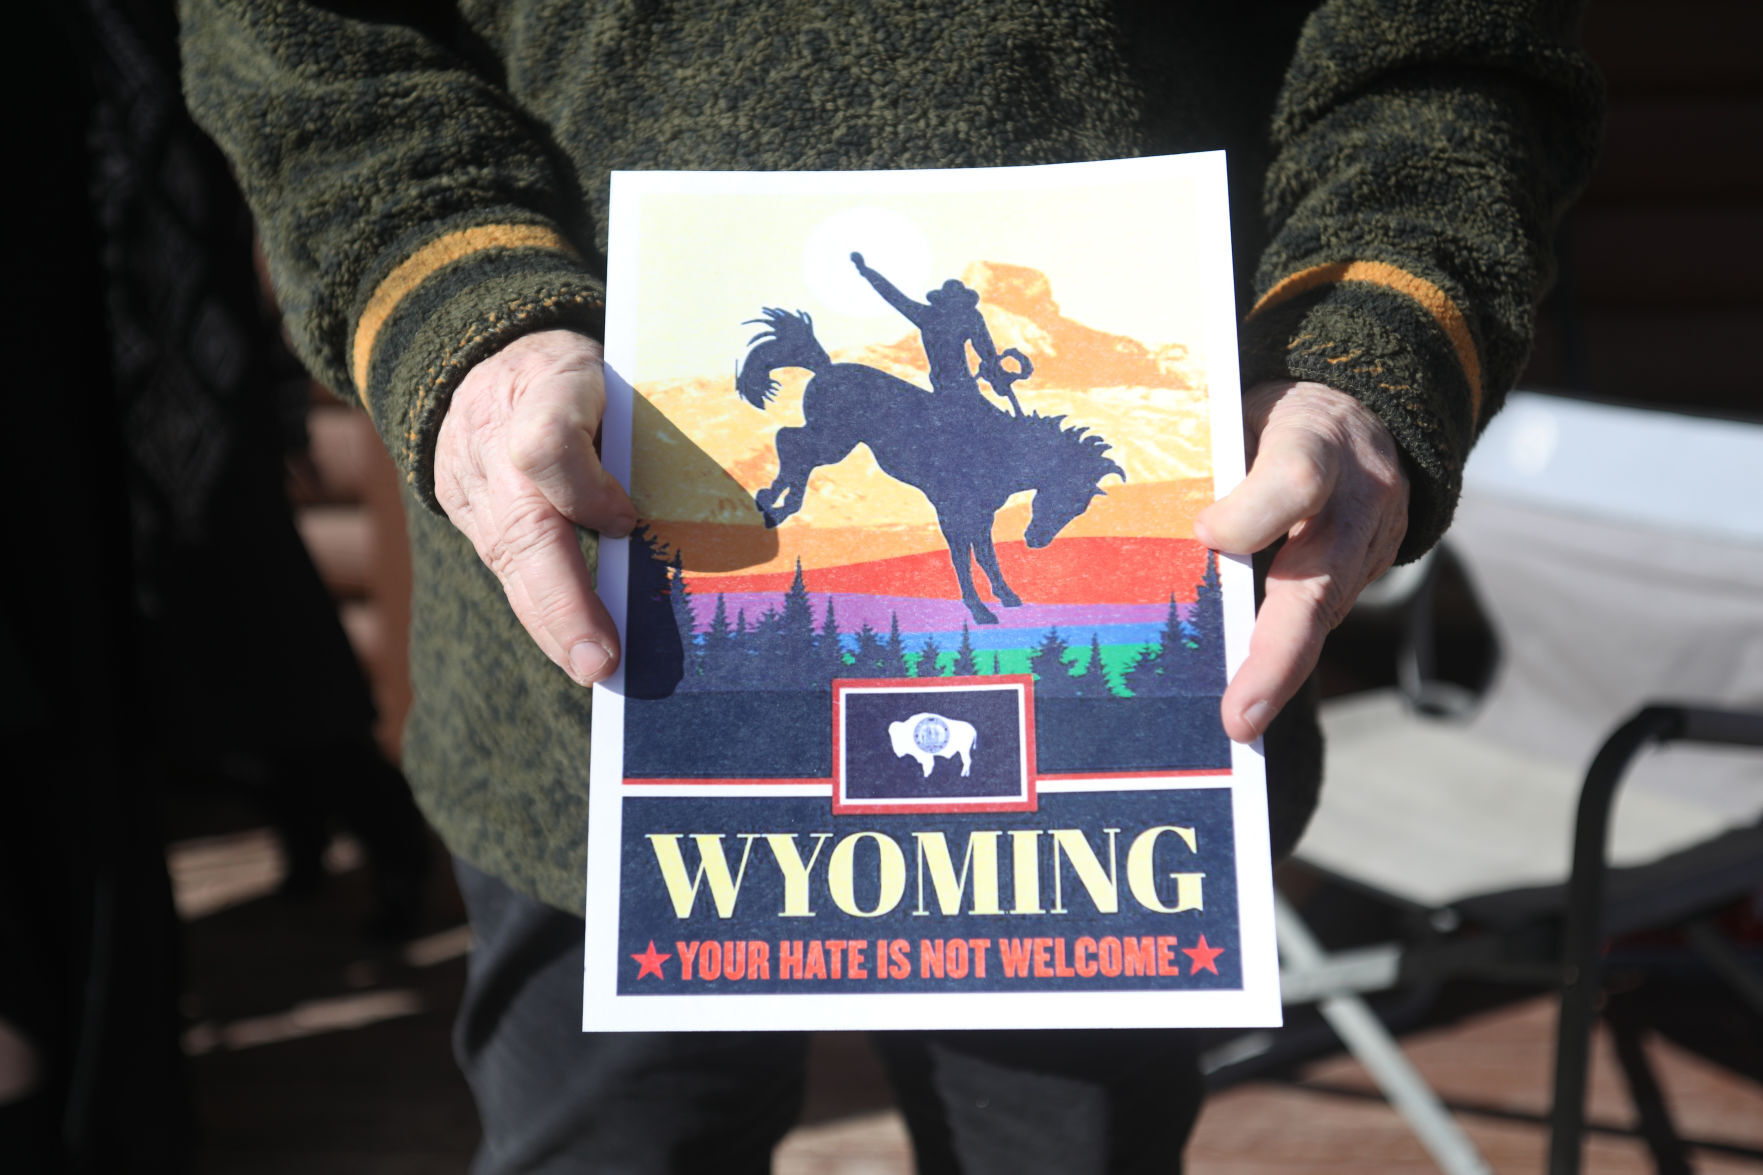 Does Wyoming have a hate-crimes law? It depends who you ask. pic